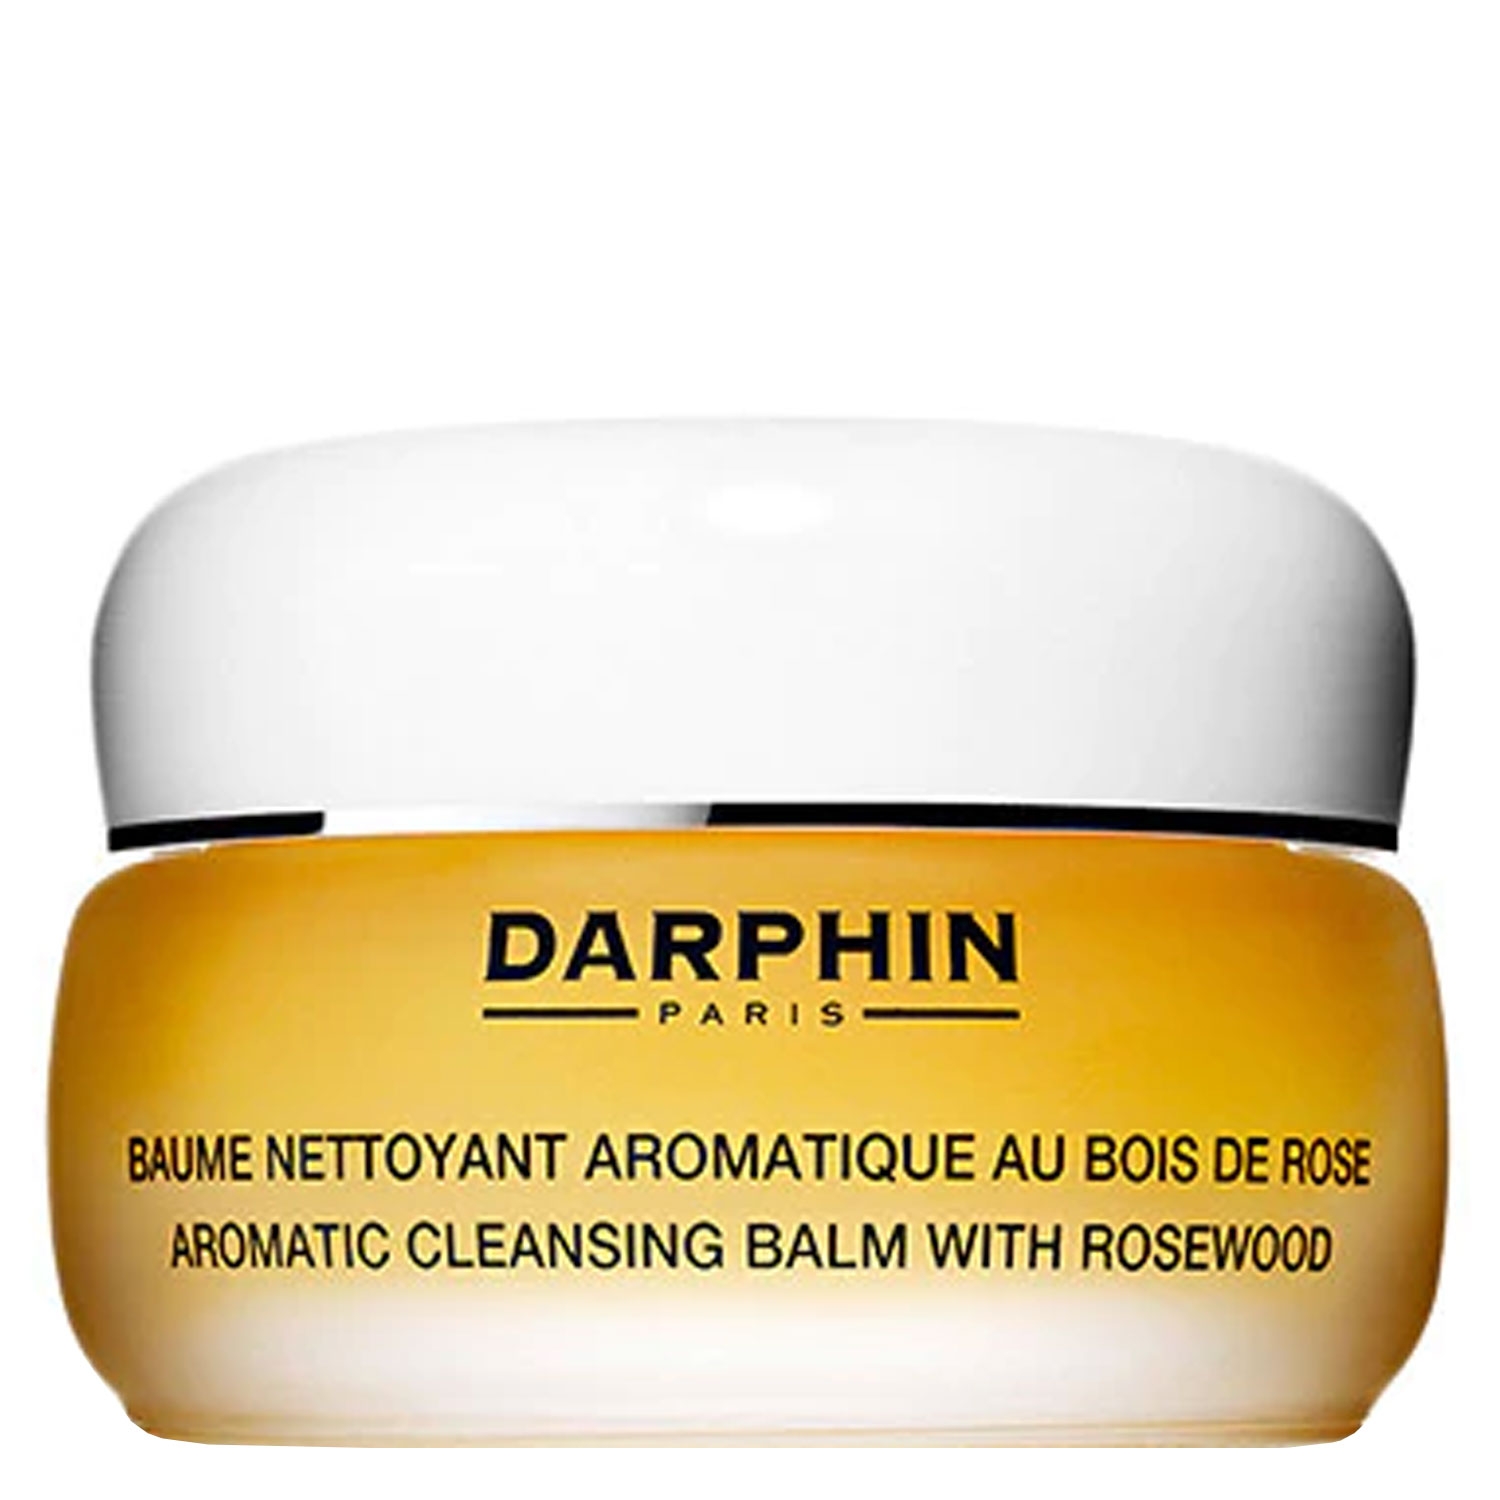 Product image from DARPHIN CARE - Aromatic Cleansing Balm with Rosewood